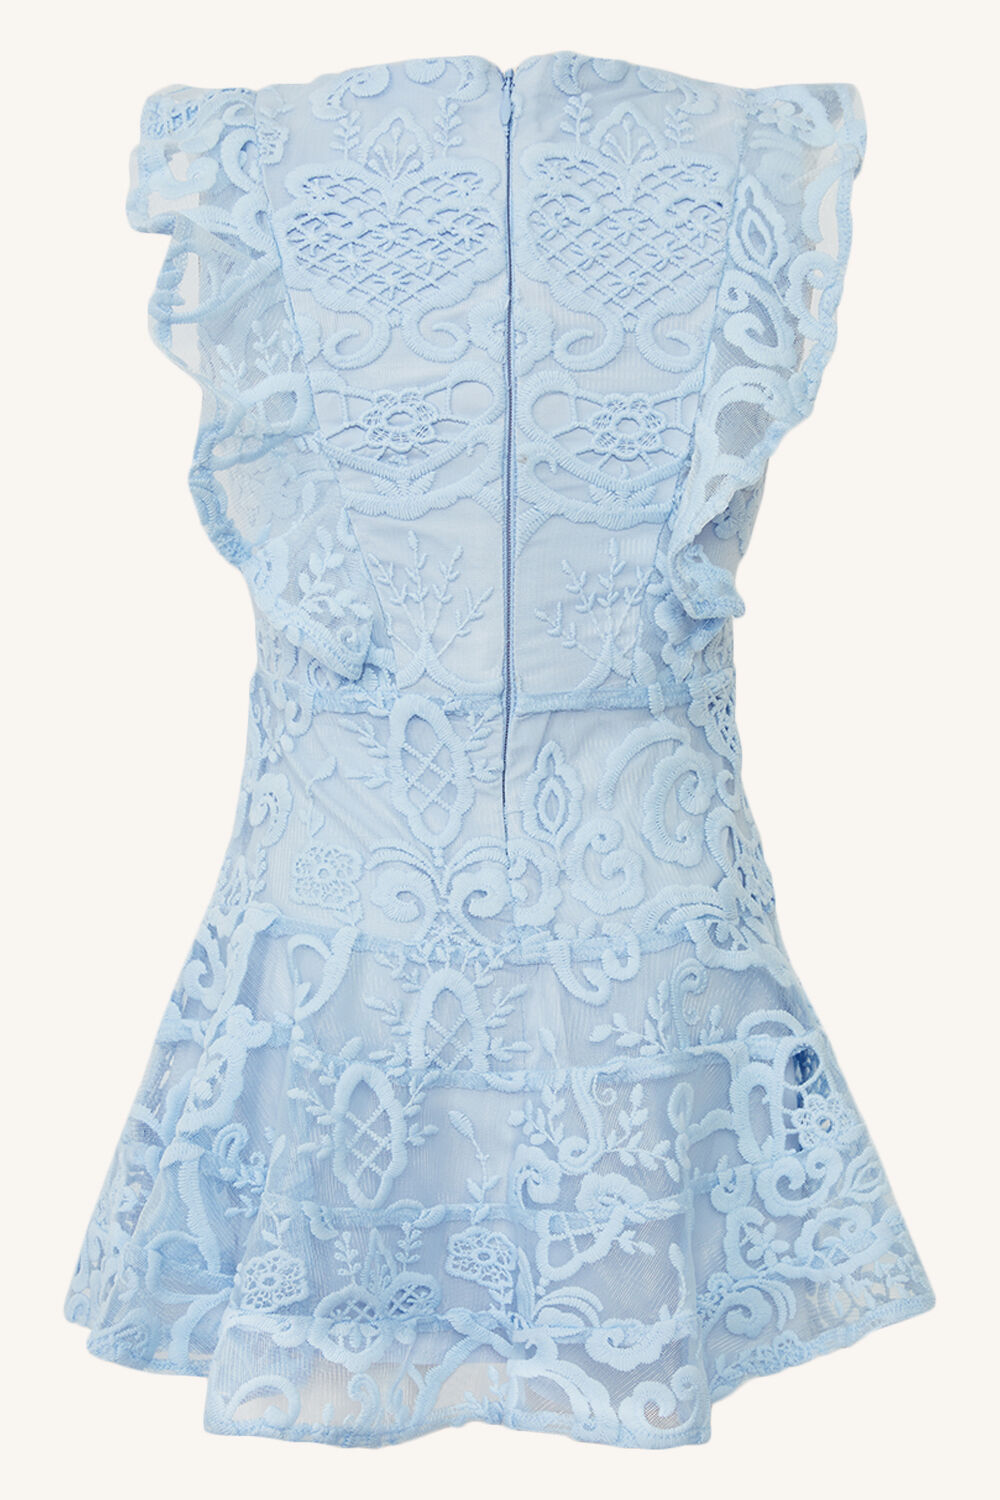 GIRLS SADIE LACE DRESS in colour CROWN BLUE